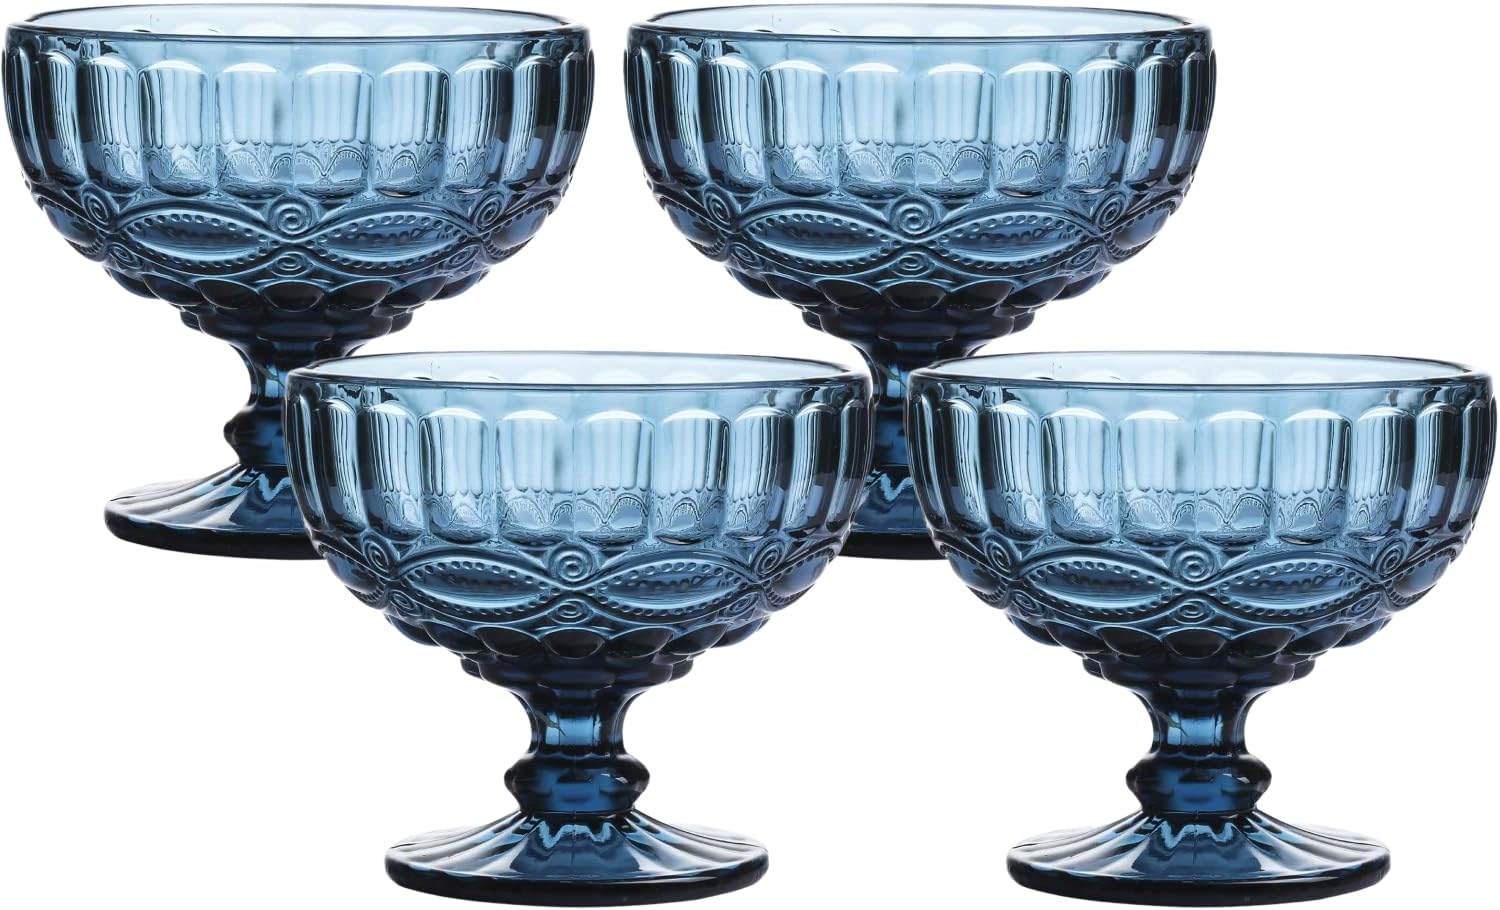 WHOLE HOUSEWARES 12 Ounce Glass Ice Cream Bowls - Vintage Pressed Pattern Glass Dessert Bowls - Trifle/Fruit/Salad/Sunday Small Ice Cream Bowl, Solid Glass Color, Set of 4 (Blue)